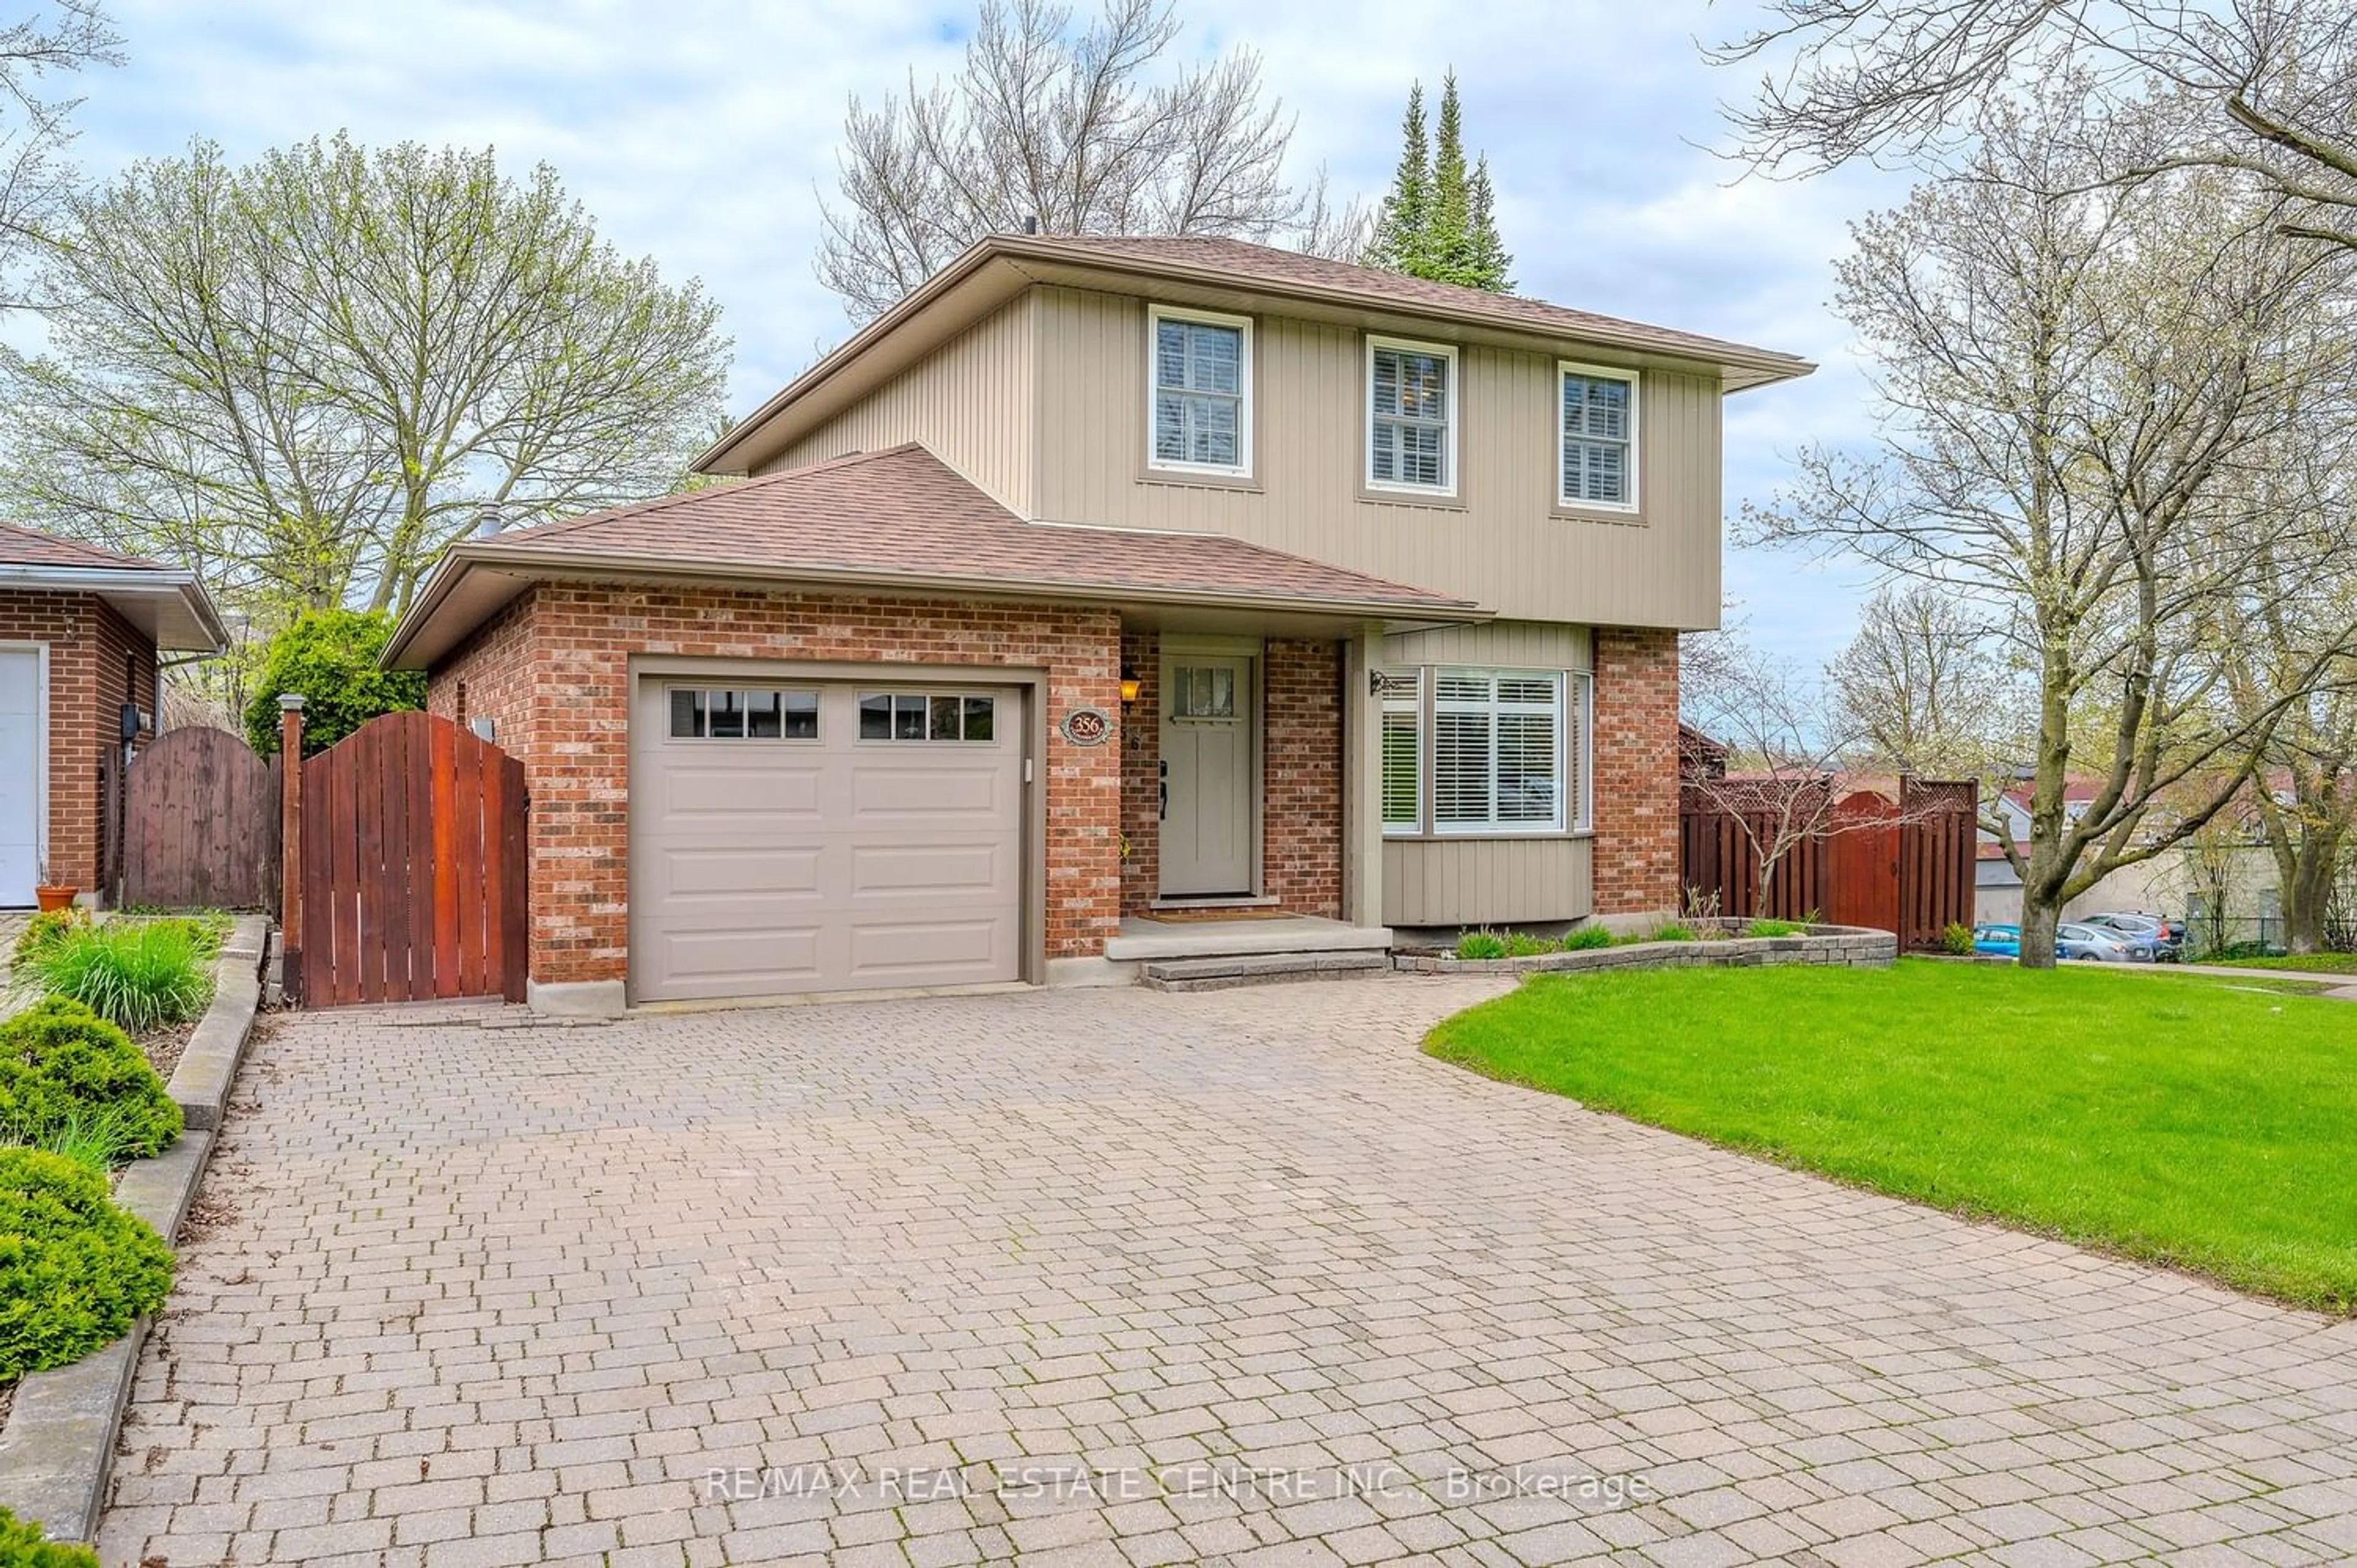 Home with brick exterior material for 356 Culpepper Pl, Waterloo Ontario N2L 5L3